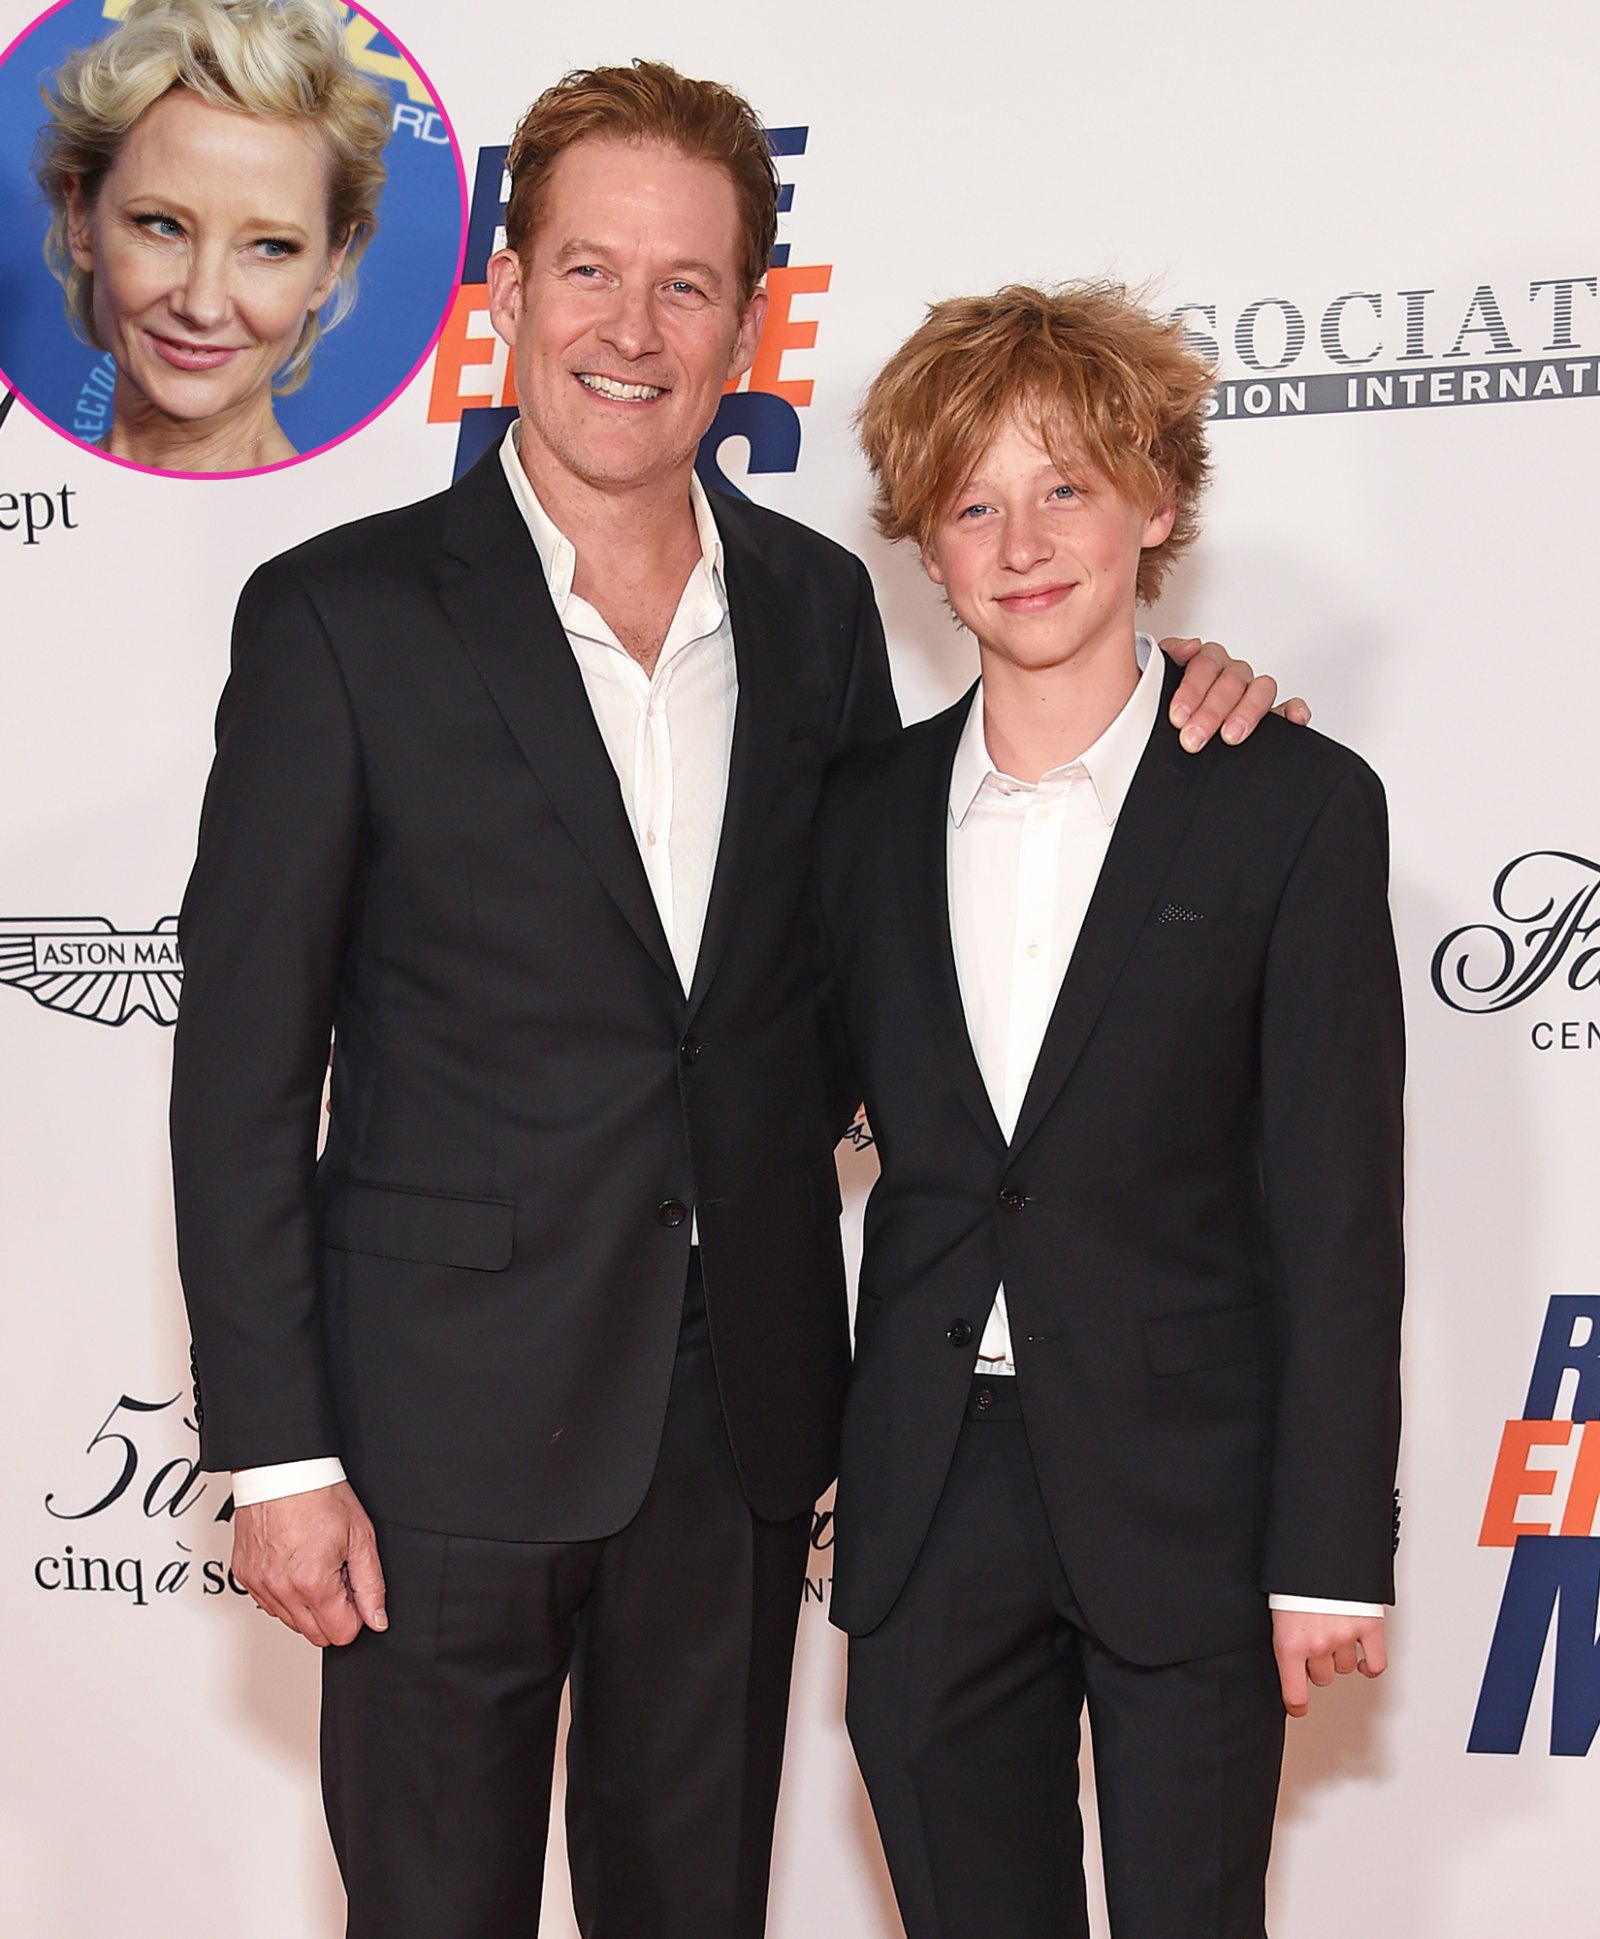 Anne Heches Son Atlas Joins Dad James Tupper on Red Carpet